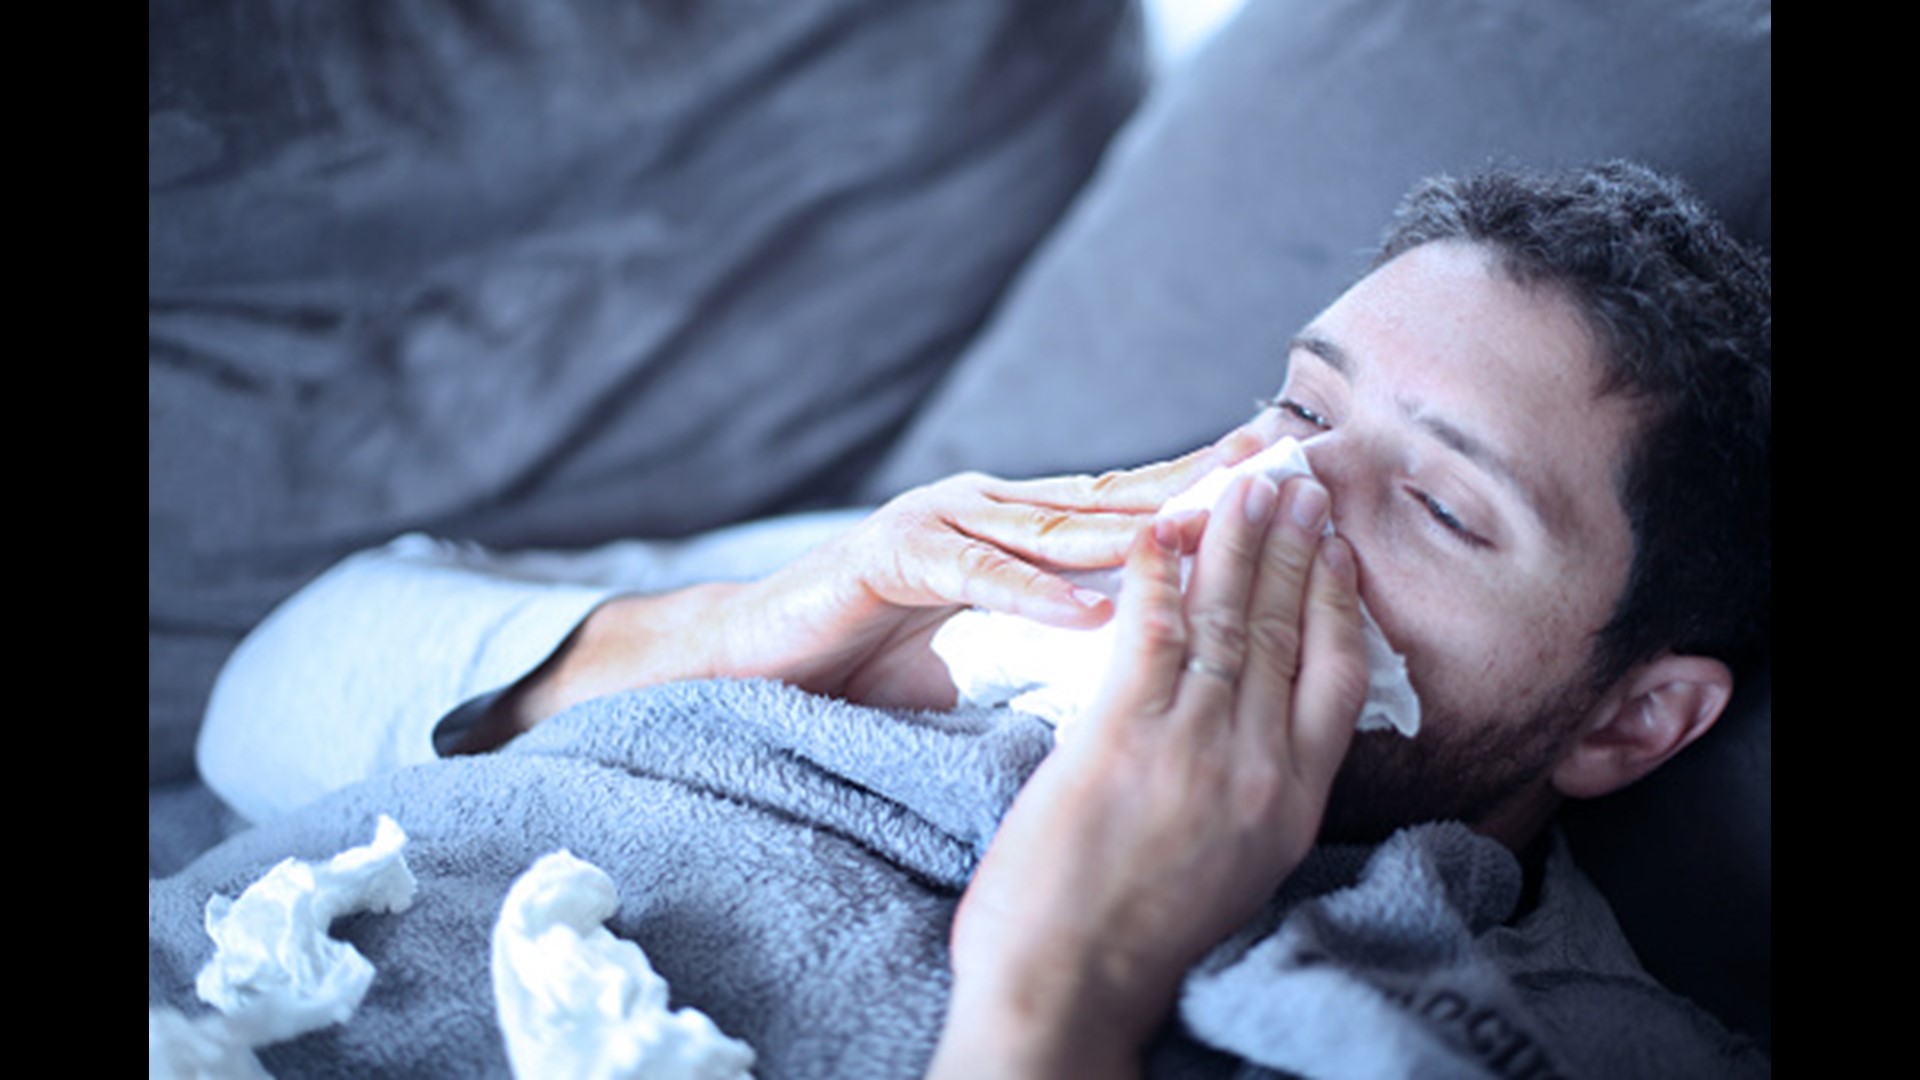 Could this possibly be the worst flu season of the decade? Chris Rogers verifies.